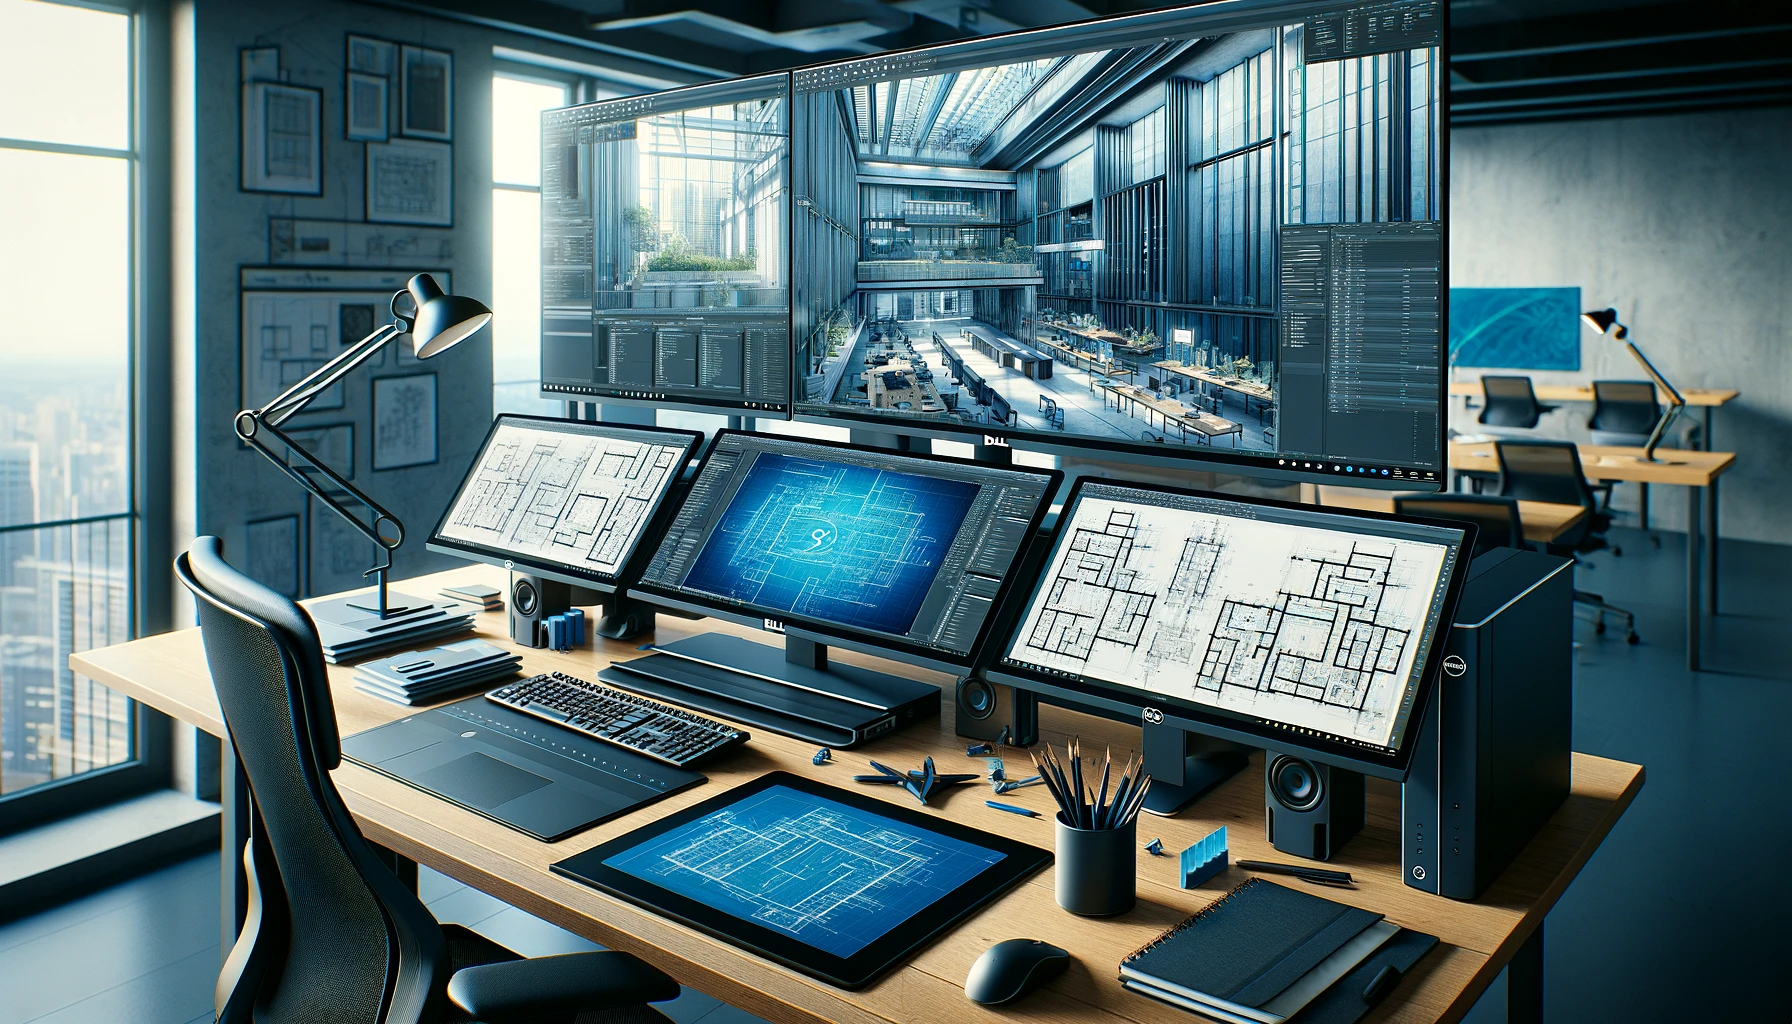 The image above features a 3D stock photo depicting a professional Dell workstation in an architectural design office, showcasing a high-end Dell Precision desktop with architectural plans and models on the monitors, set in a modern office space bathed in natural light.